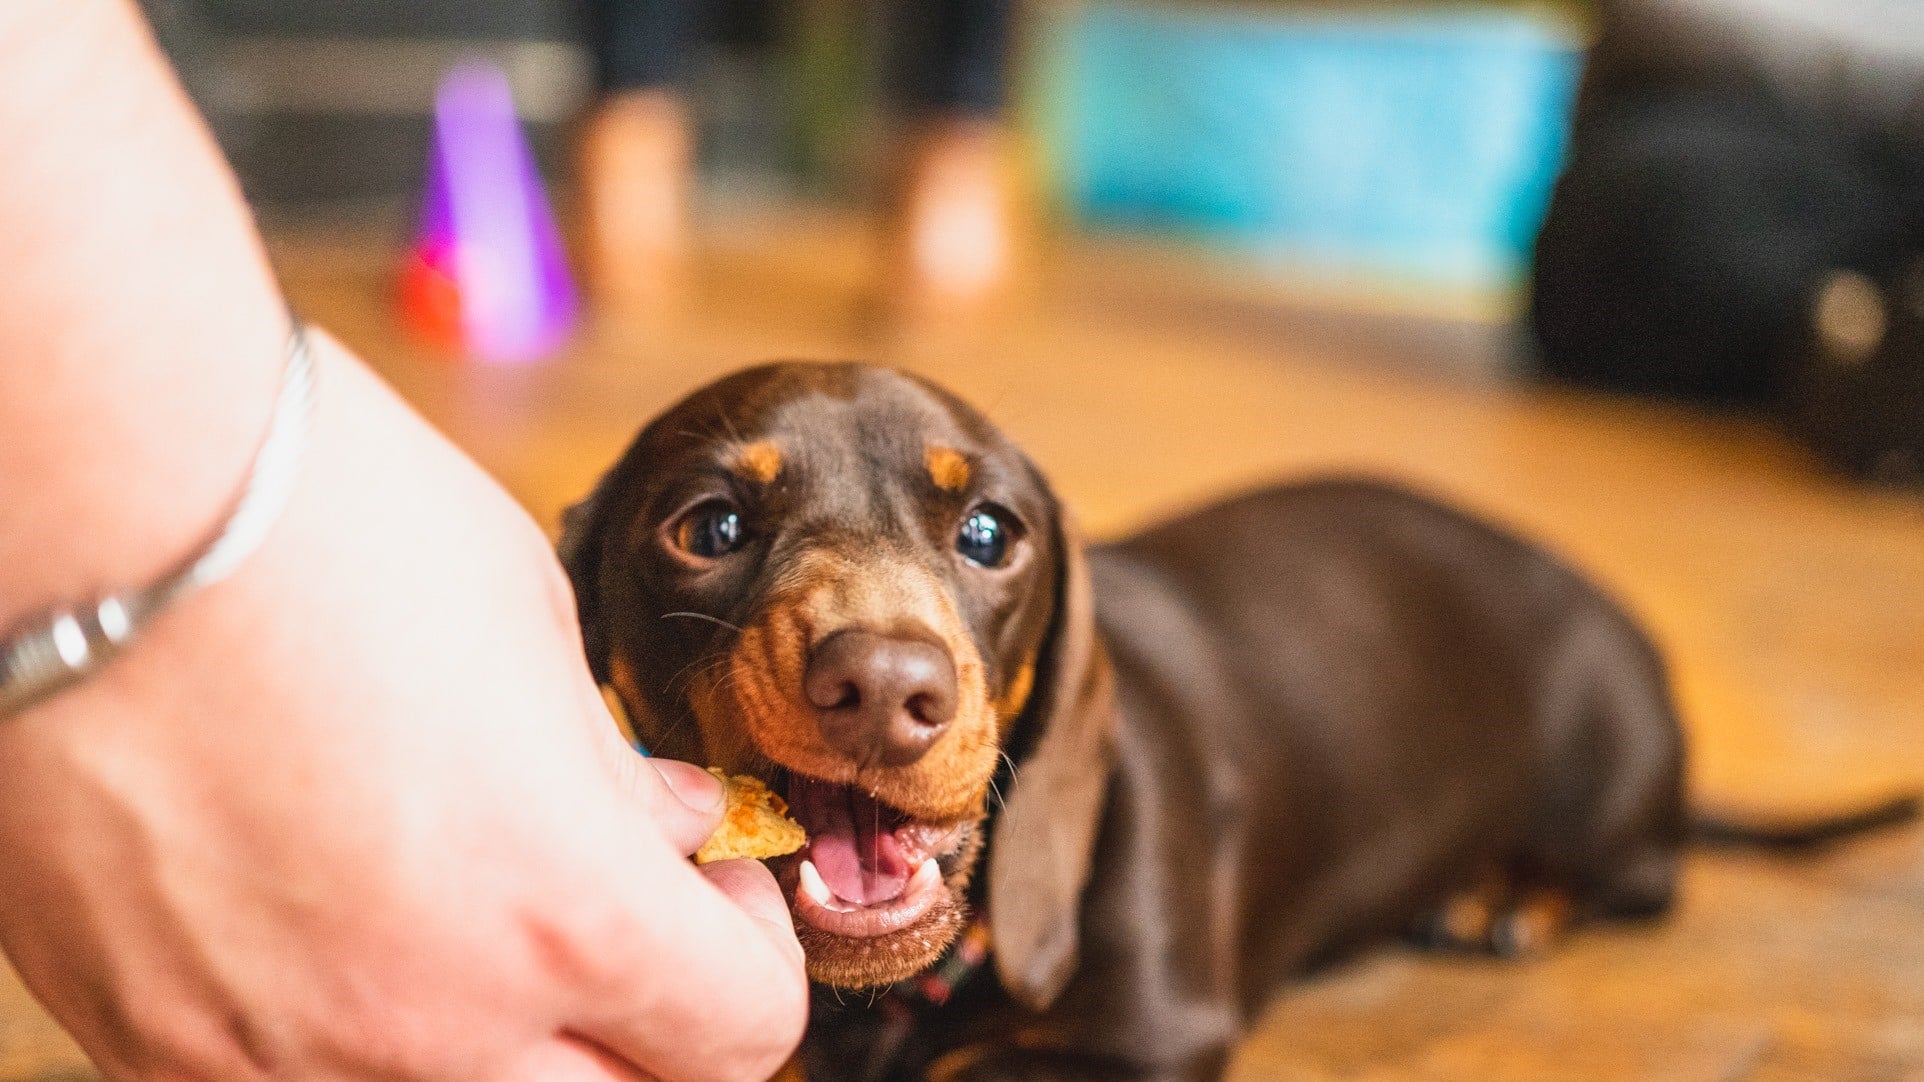 A puppy taking a bit of a dog biscuit at Pup-Up Cafe